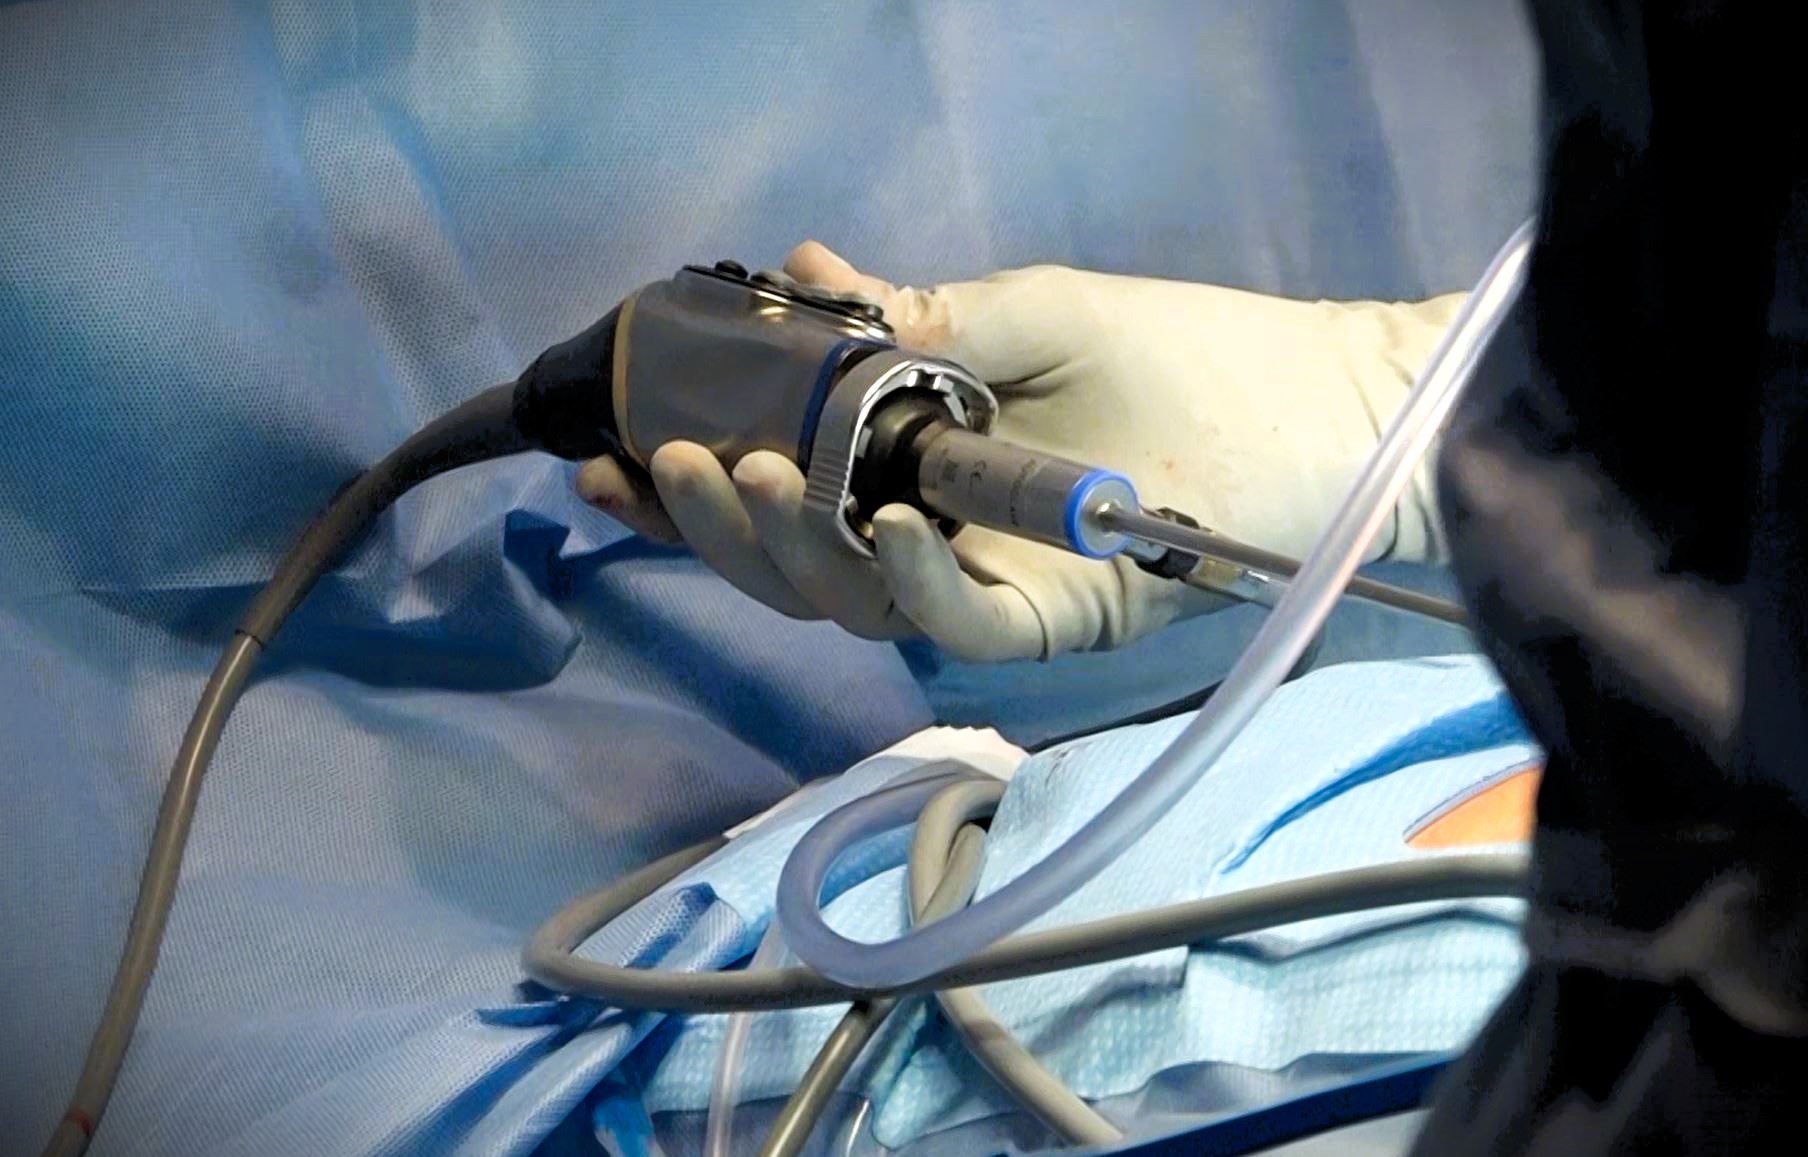 A gloved hand holds a laparoscopic surgical instrument over a patient covered in blue sterile drapes.